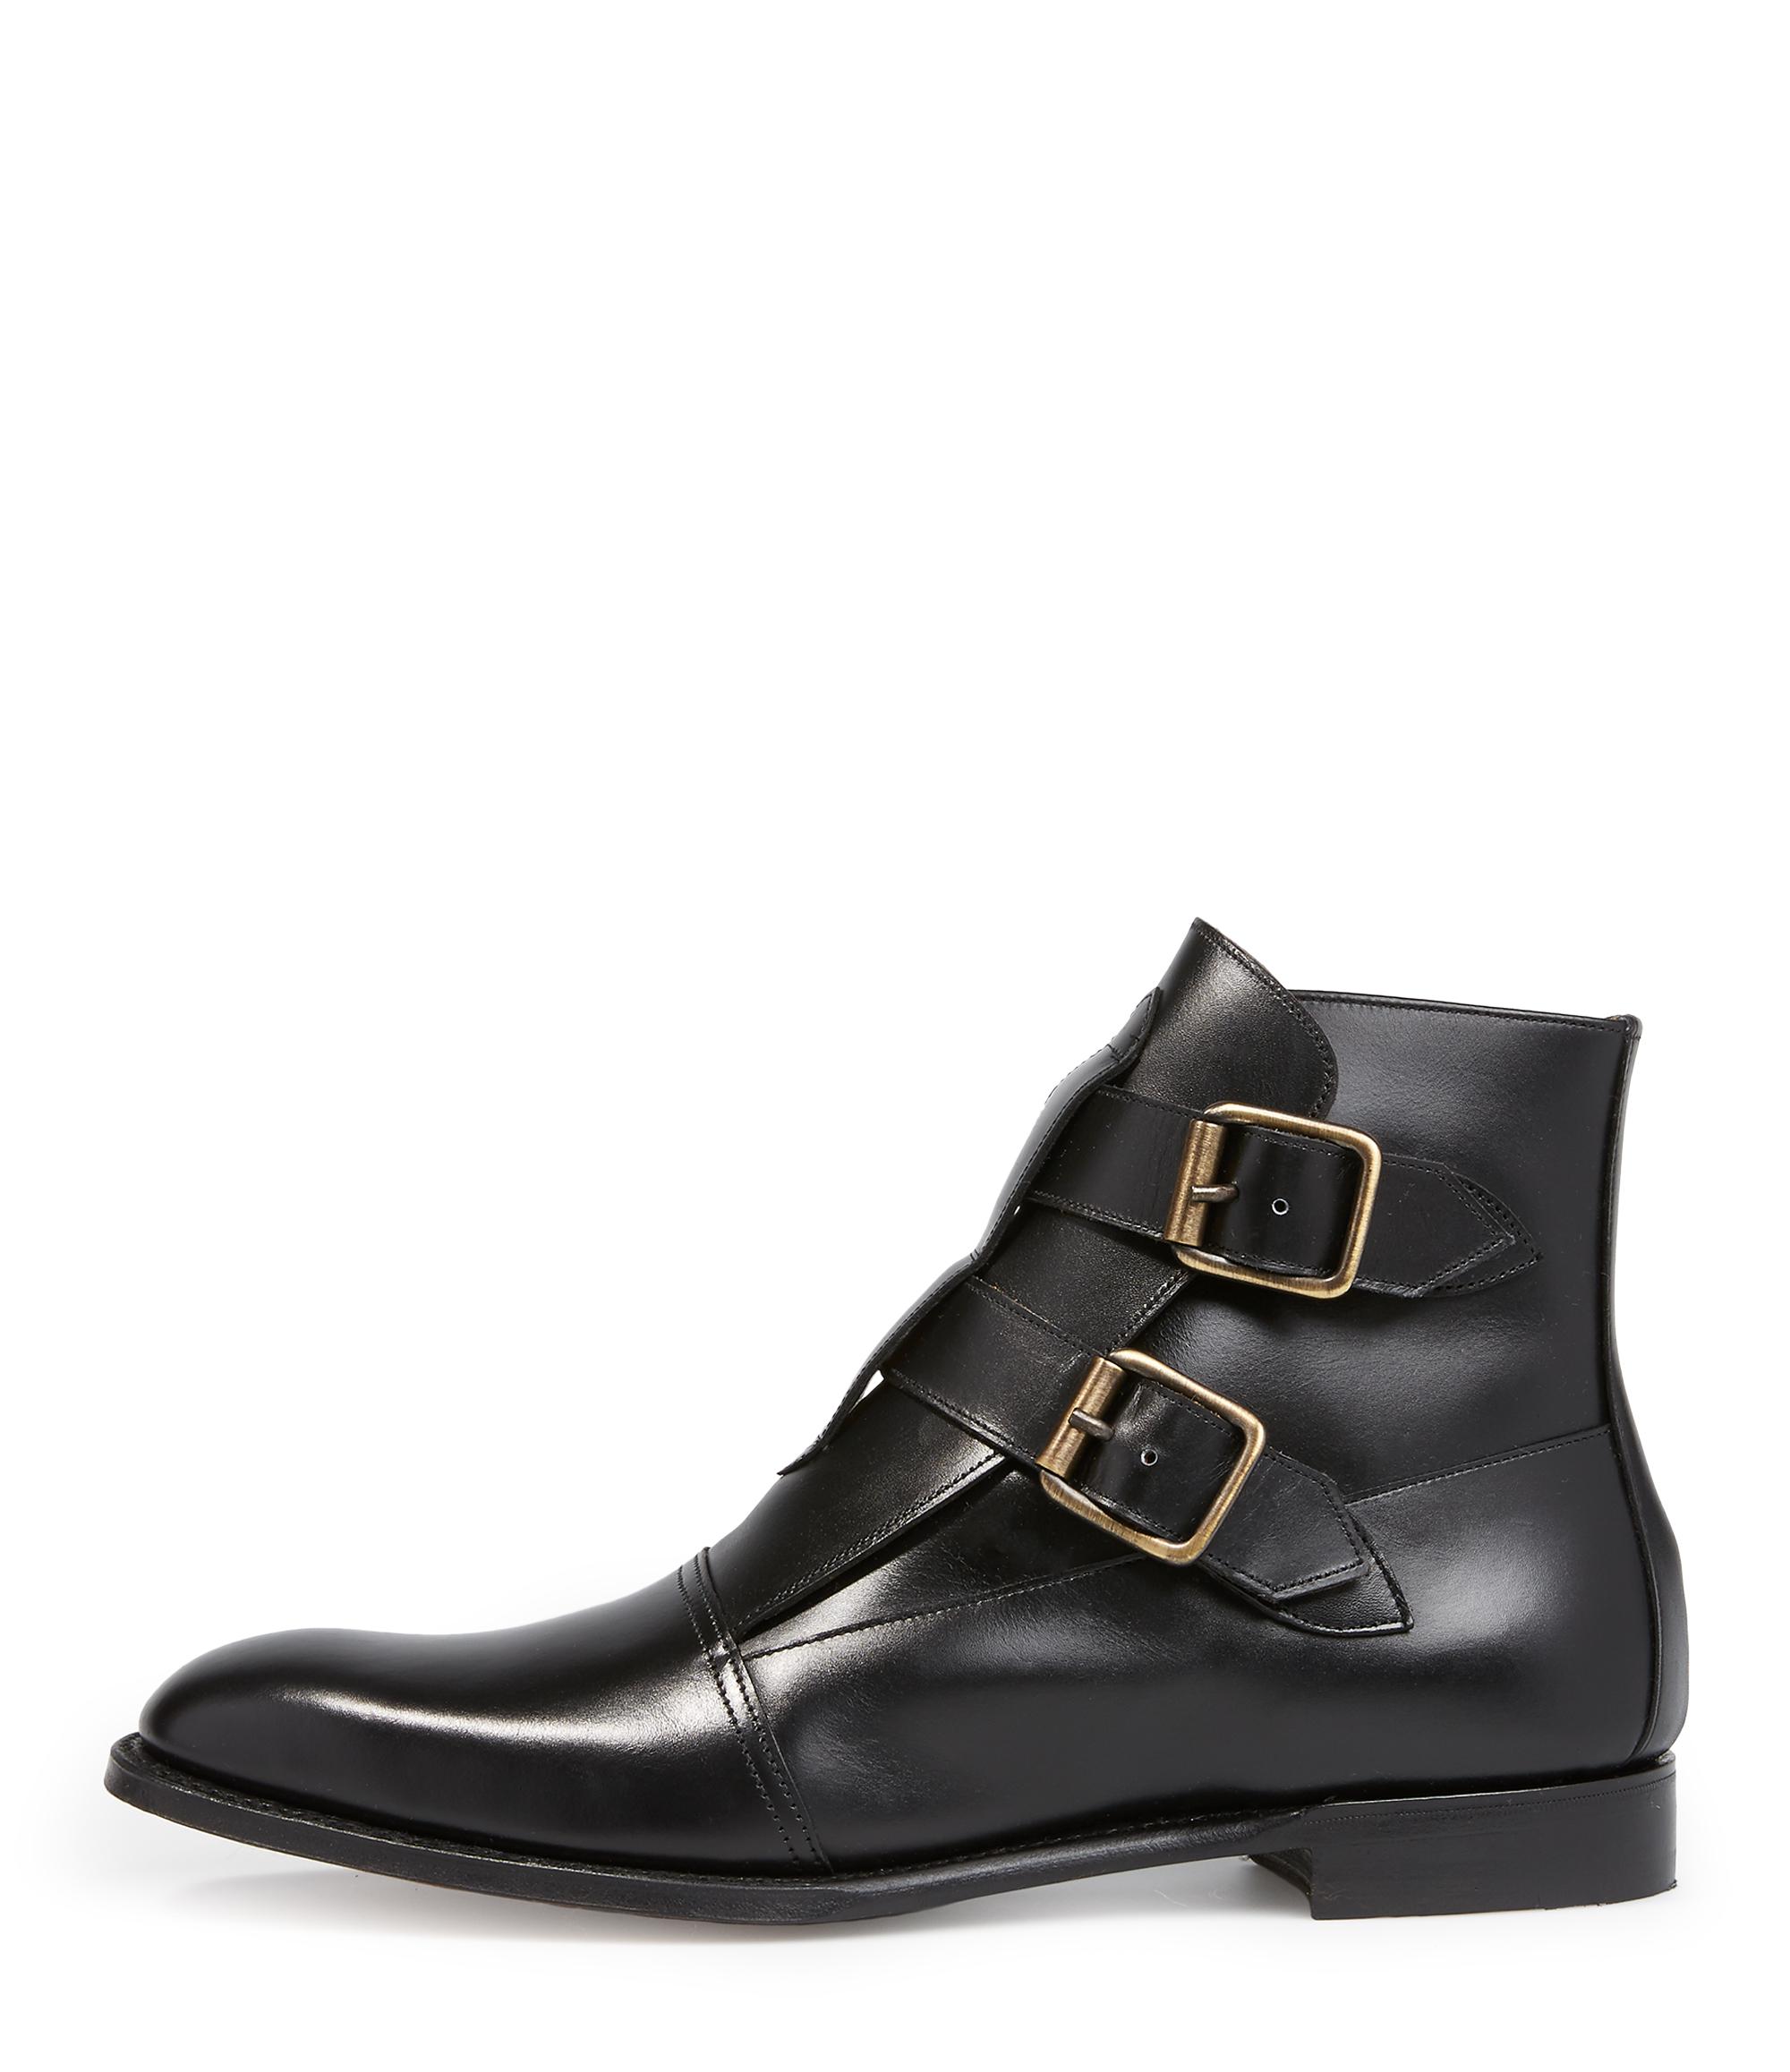 Vivienne Westwood Leather Joseph Cheaney & Son Seditionary Dress Boots ...